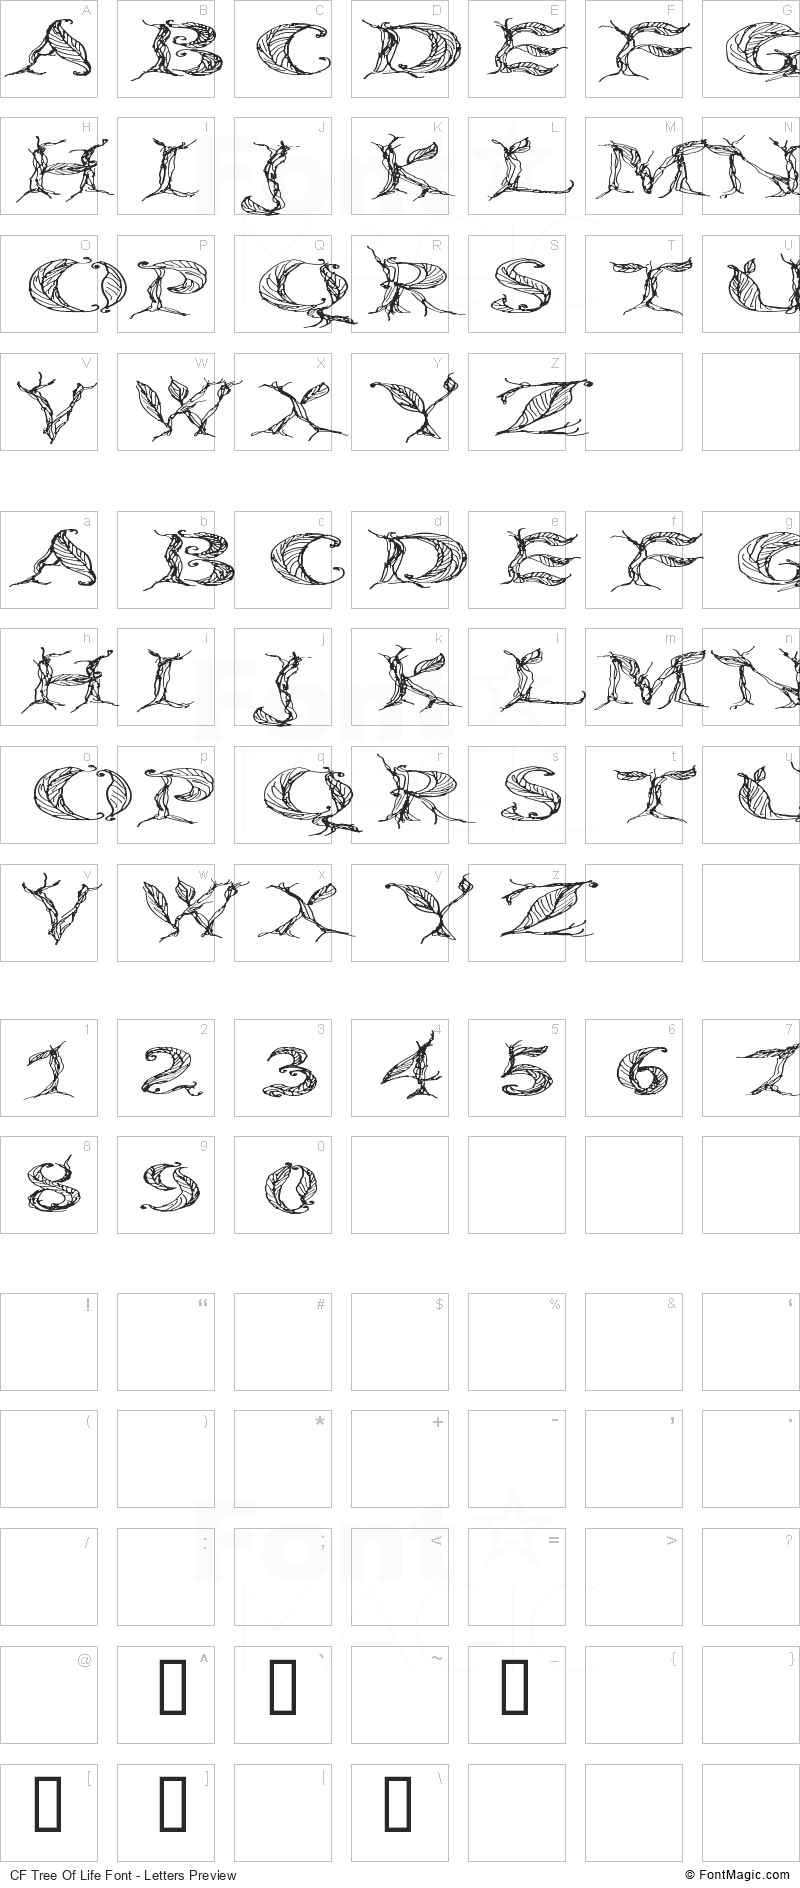 CF Tree Of Life Font - All Latters Preview Chart